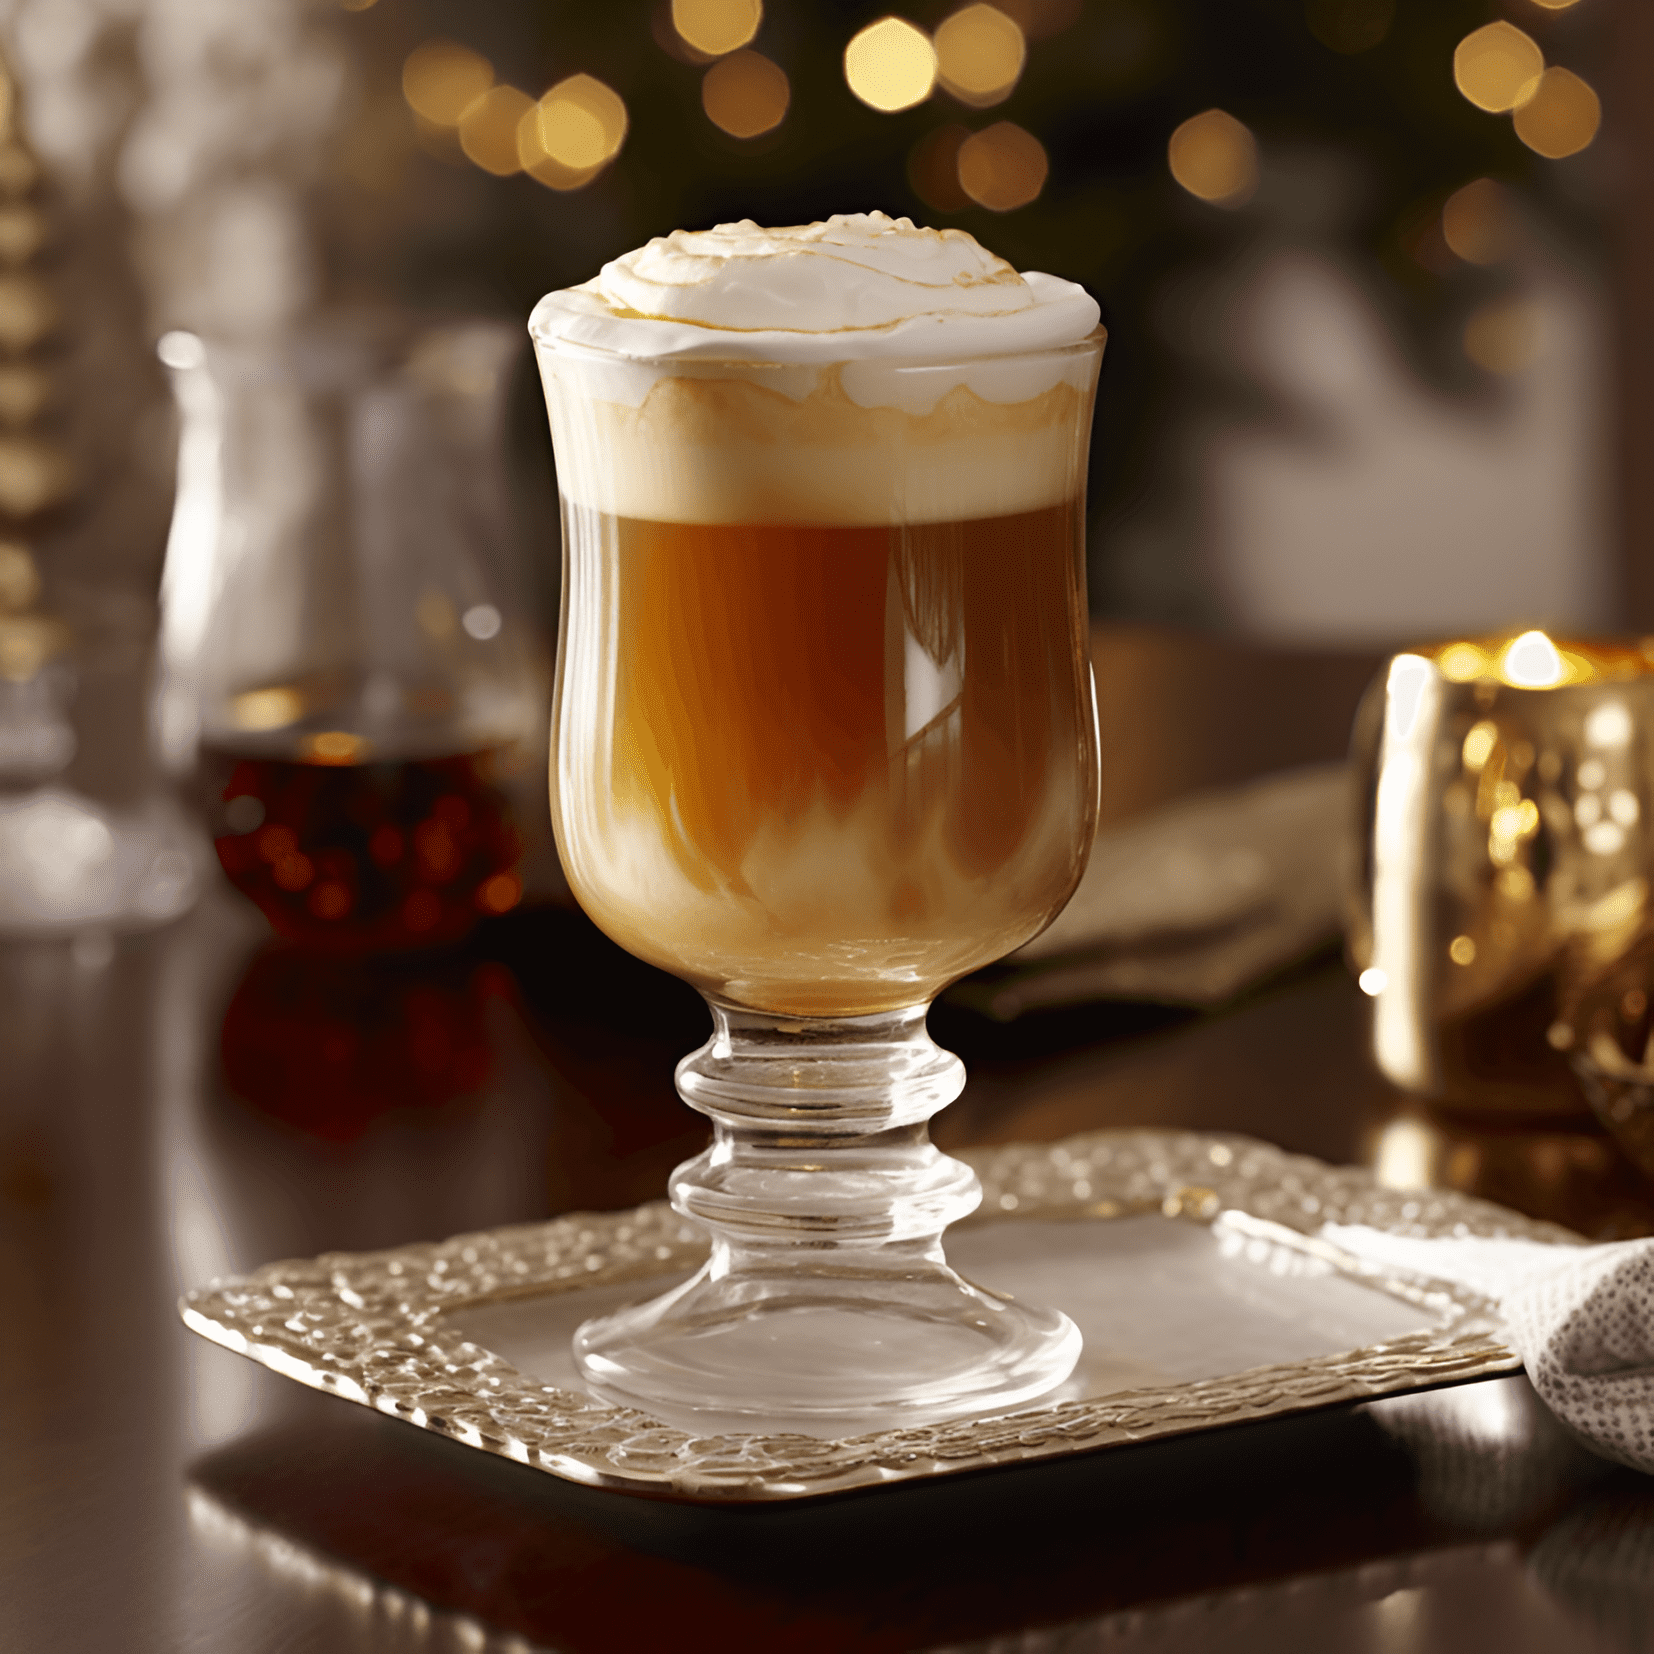 Brandy Egg Nog Cocktail Recipe - The Brandy Egg Nog cocktail is rich, creamy, and velvety with a perfect balance of sweetness and warmth from the brandy. The spices, such as nutmeg and cinnamon, add a subtle depth of flavor, making it a comforting and indulgent treat.